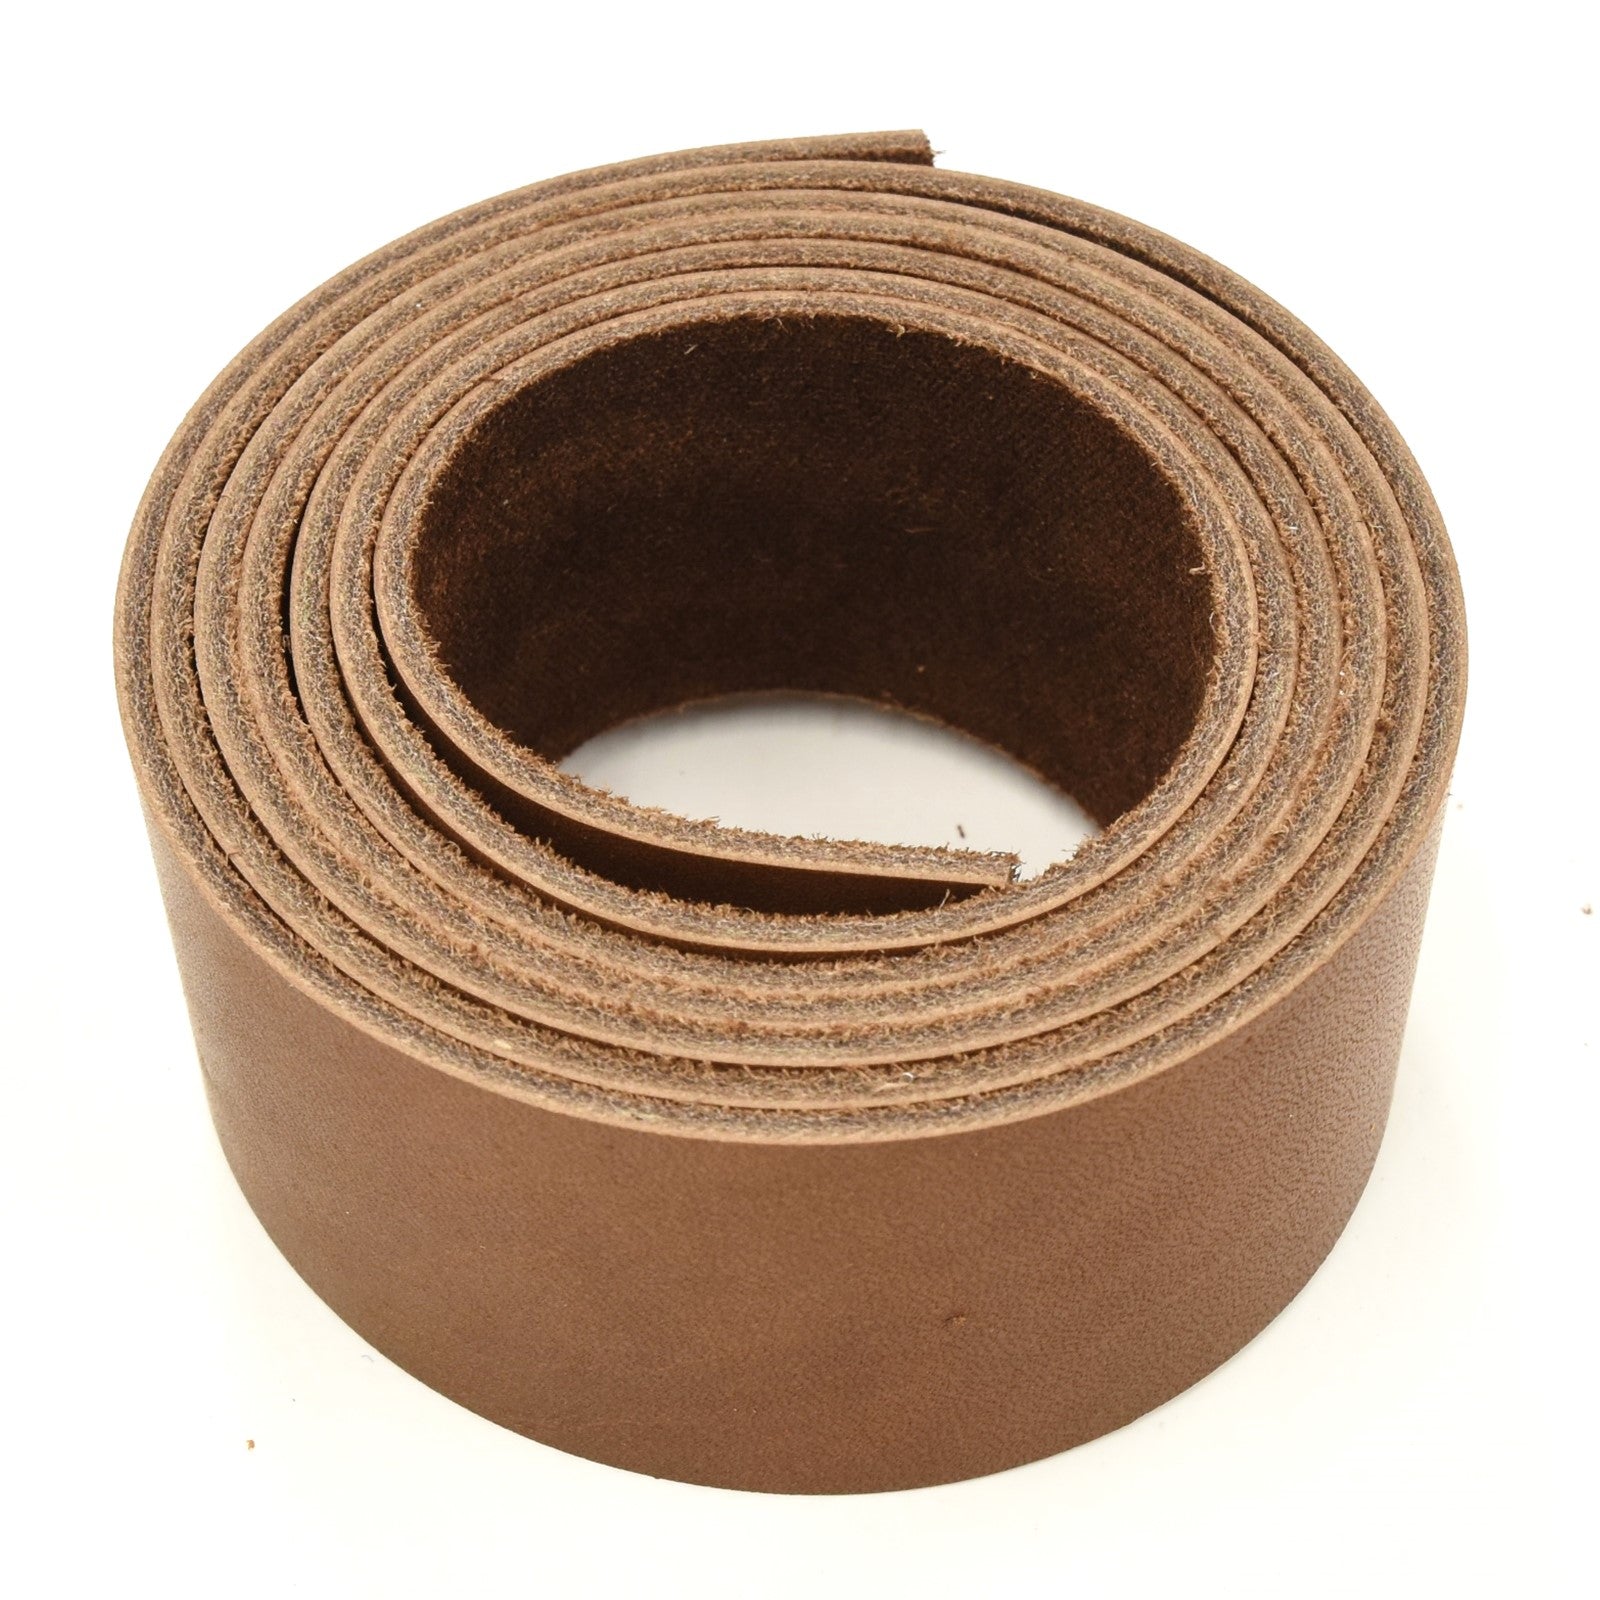 Oil Tanned Summits Edge Leather 54" Strap Various Colors and Widths 4-6 oz, Big Wall Medium Brown / 1 1/2 | The Leather Guy